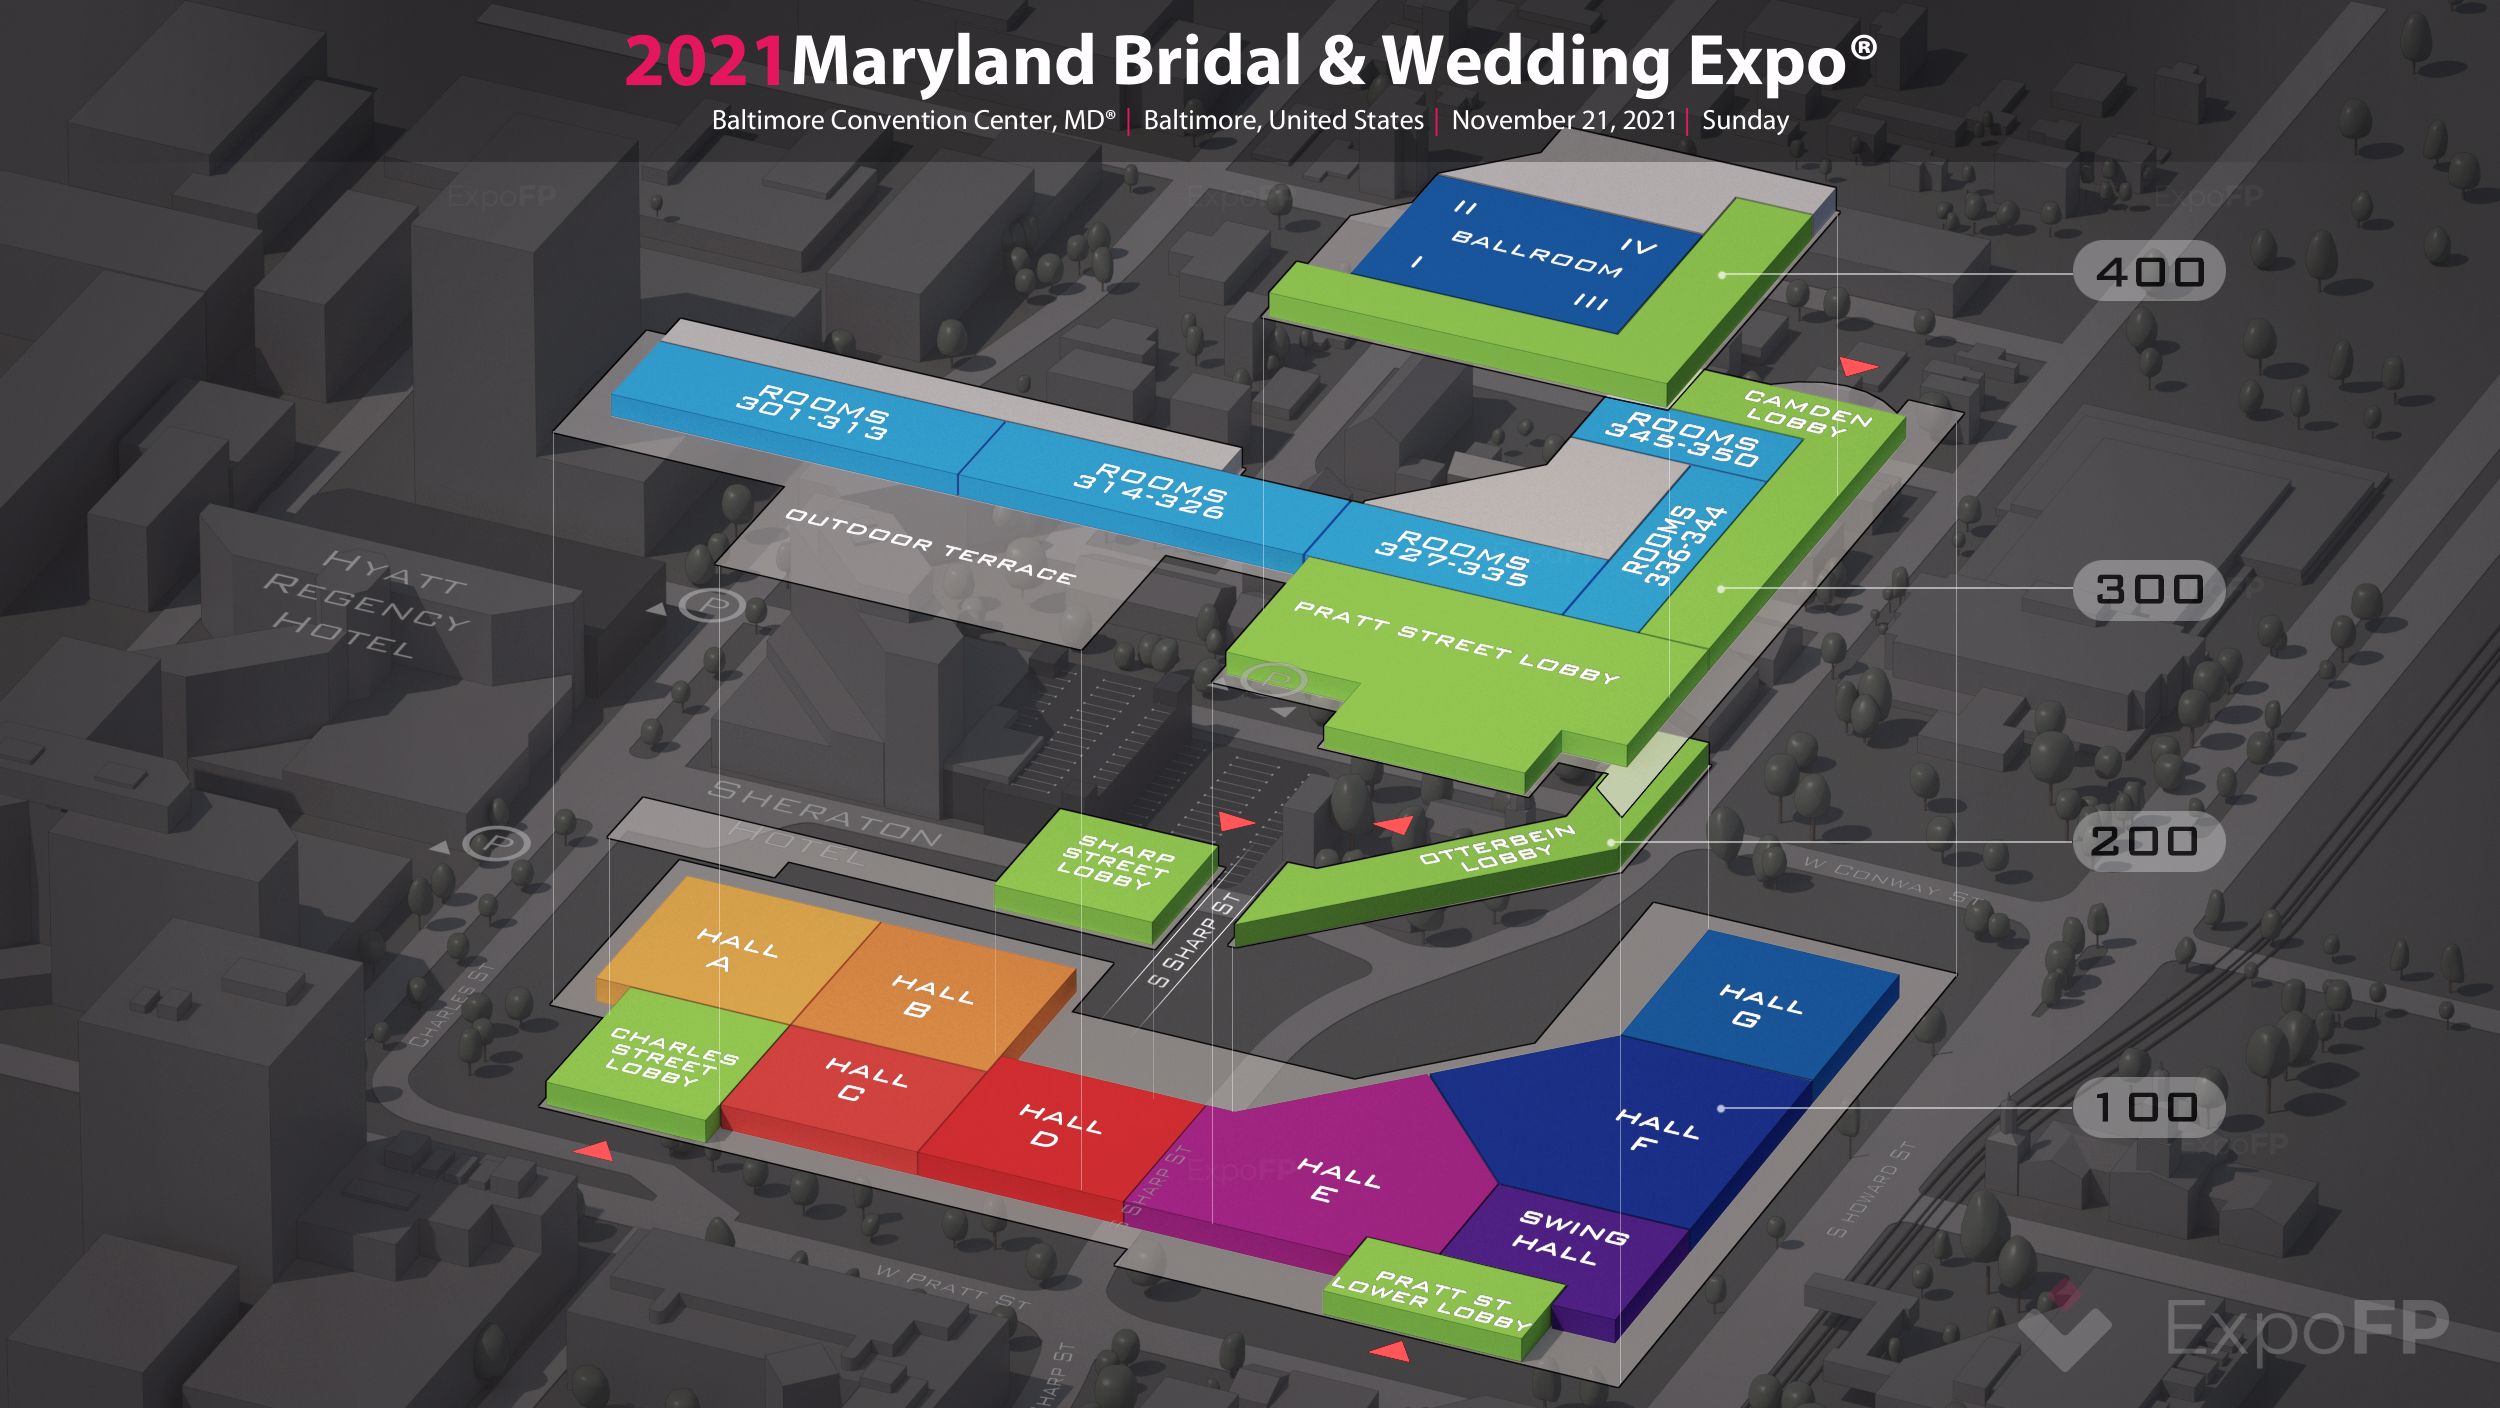 Maryland Bridal & Wedding Expo 2021 in Baltimore Convention Center, MD